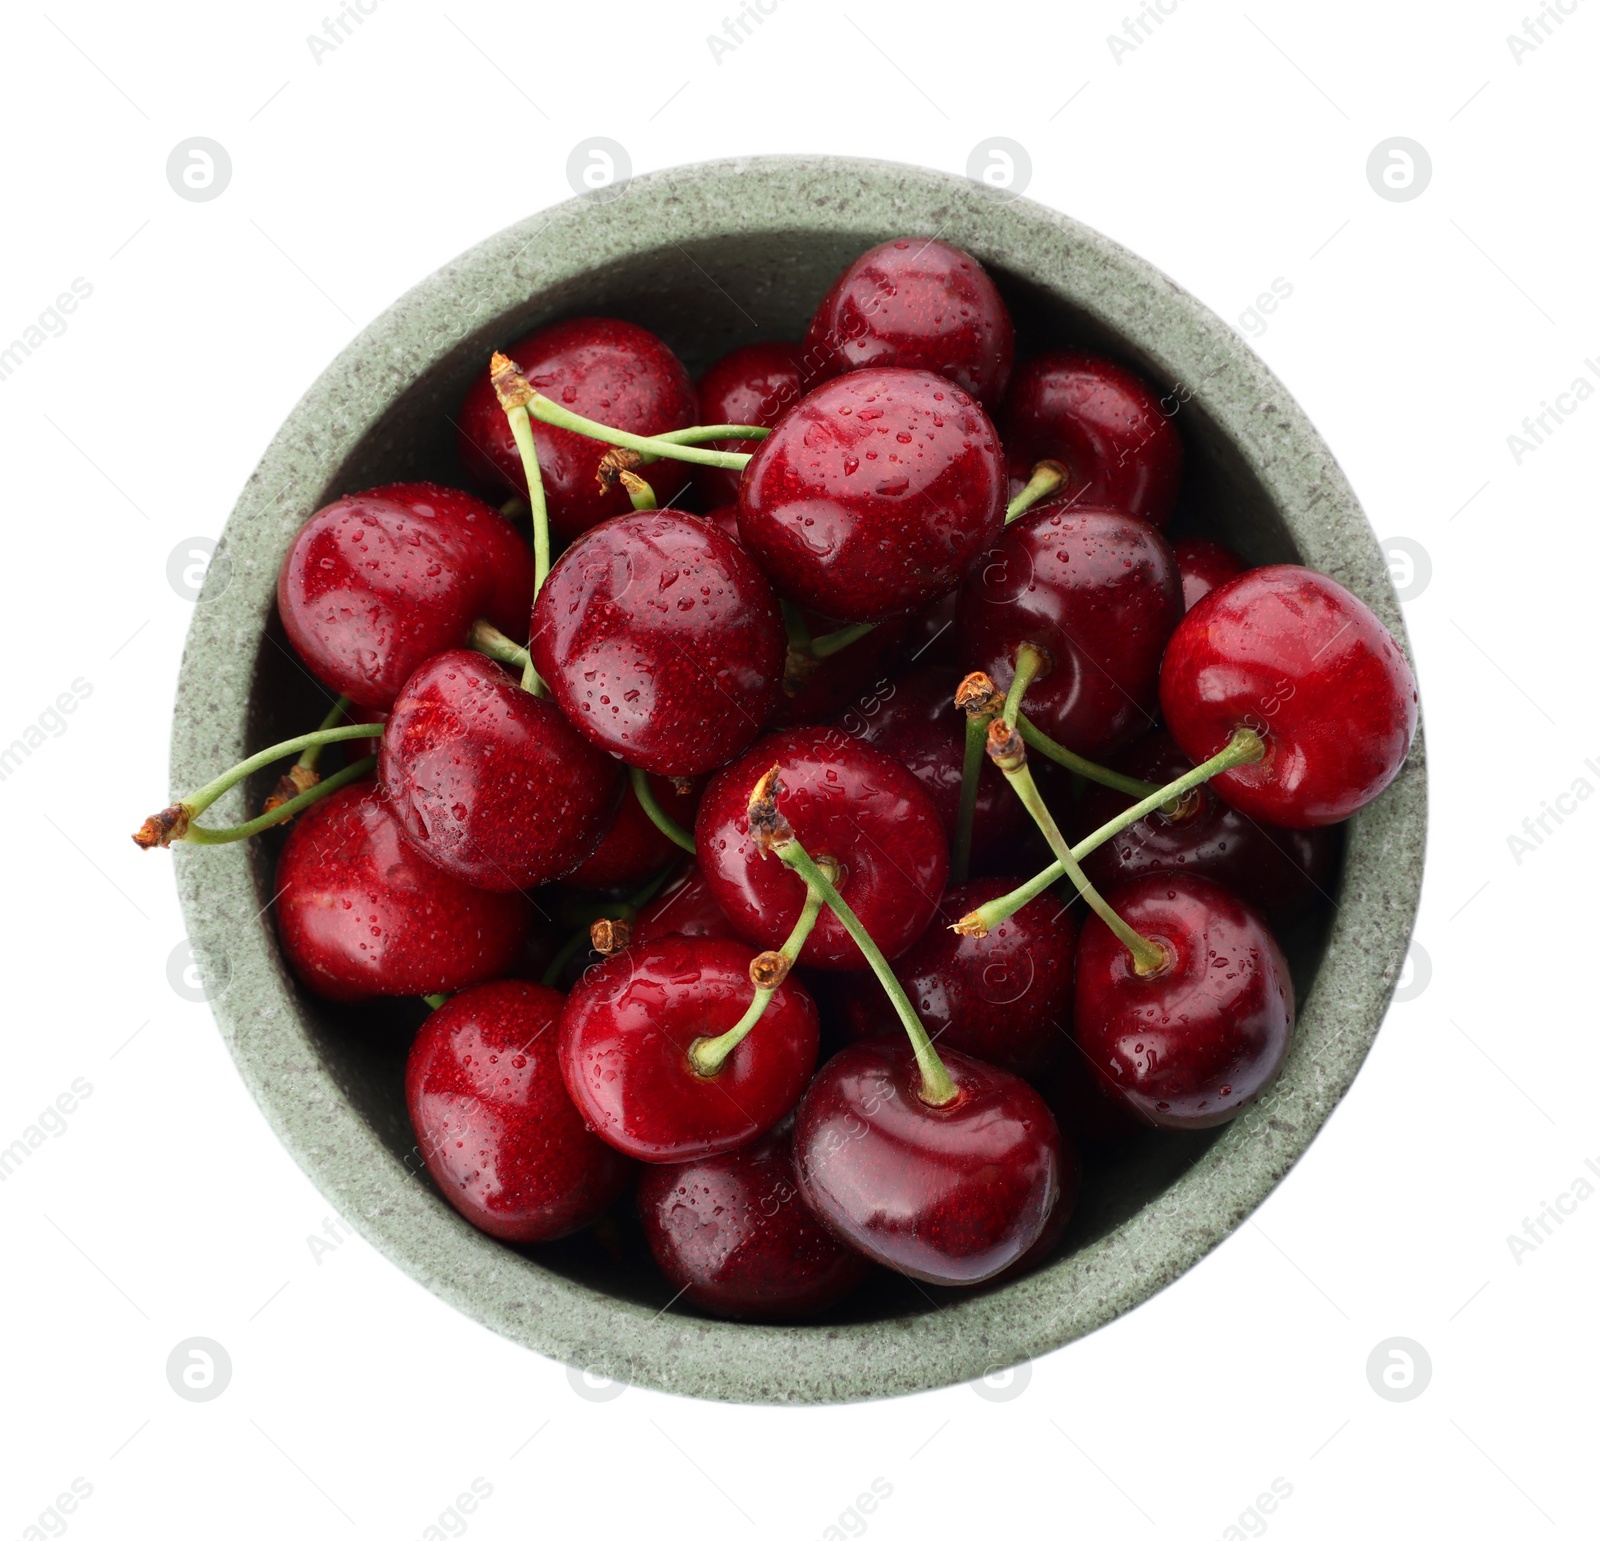 Photo of Tasty ripe sweet cherries in bowl on white background, top view